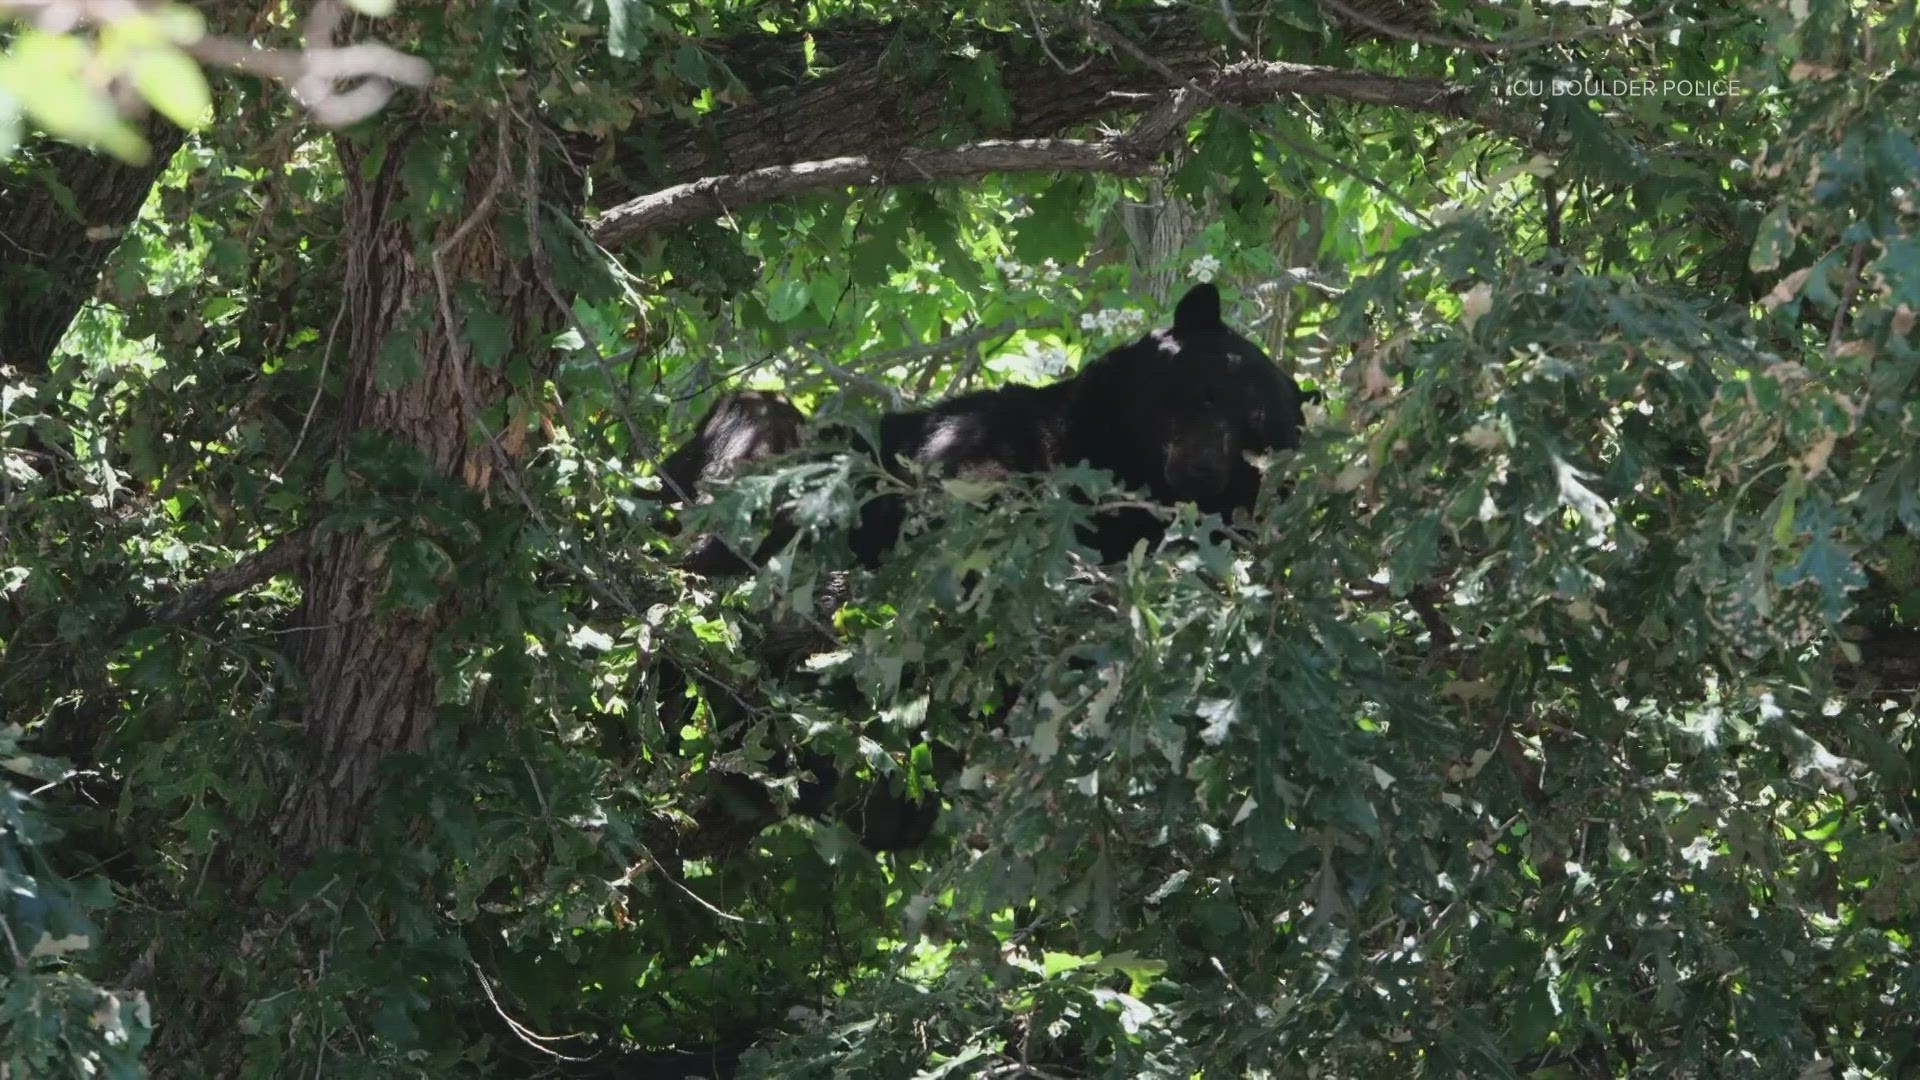 A bear wandered on the University of Colorado Boulder campus on Tuesday and took up residence in a tree near University Memorial Center.